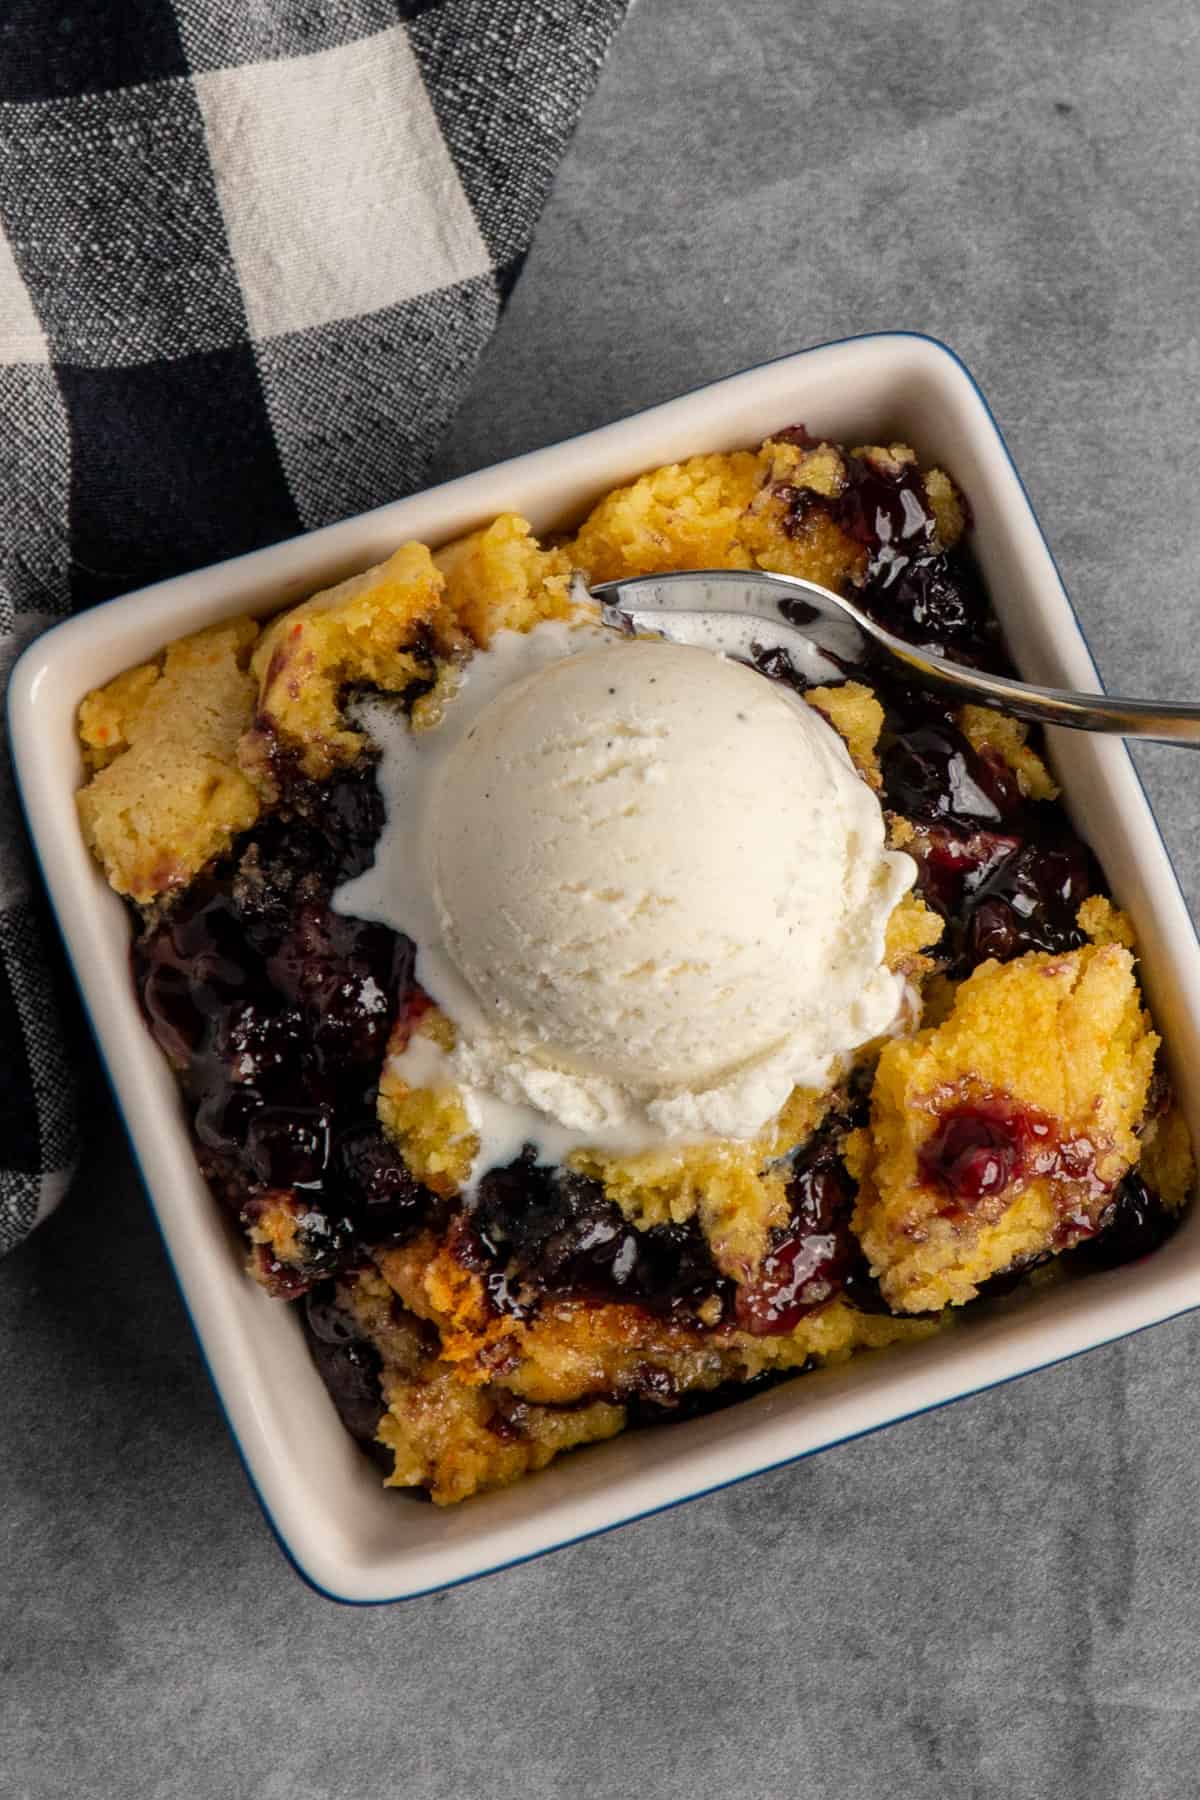 Overhead look at blueberry cobbler with ice cream on top